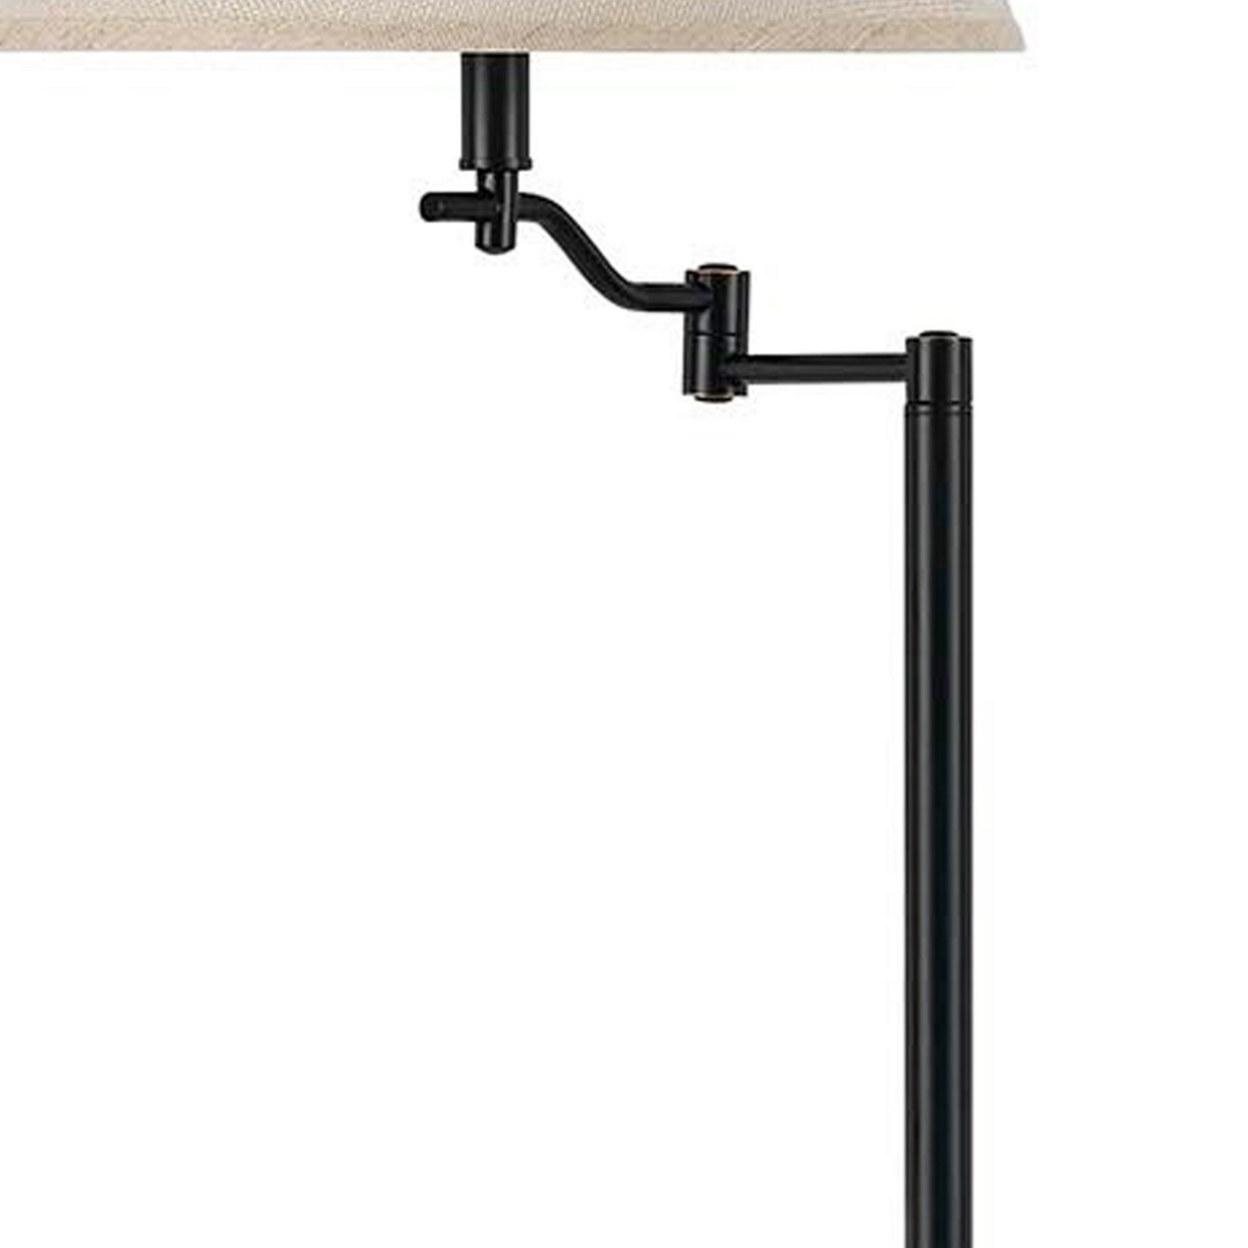 3 Way Metal Body Floor Lamp With Swing Arm And Conical Fabric Shade, Black- Saltoro Sherpi